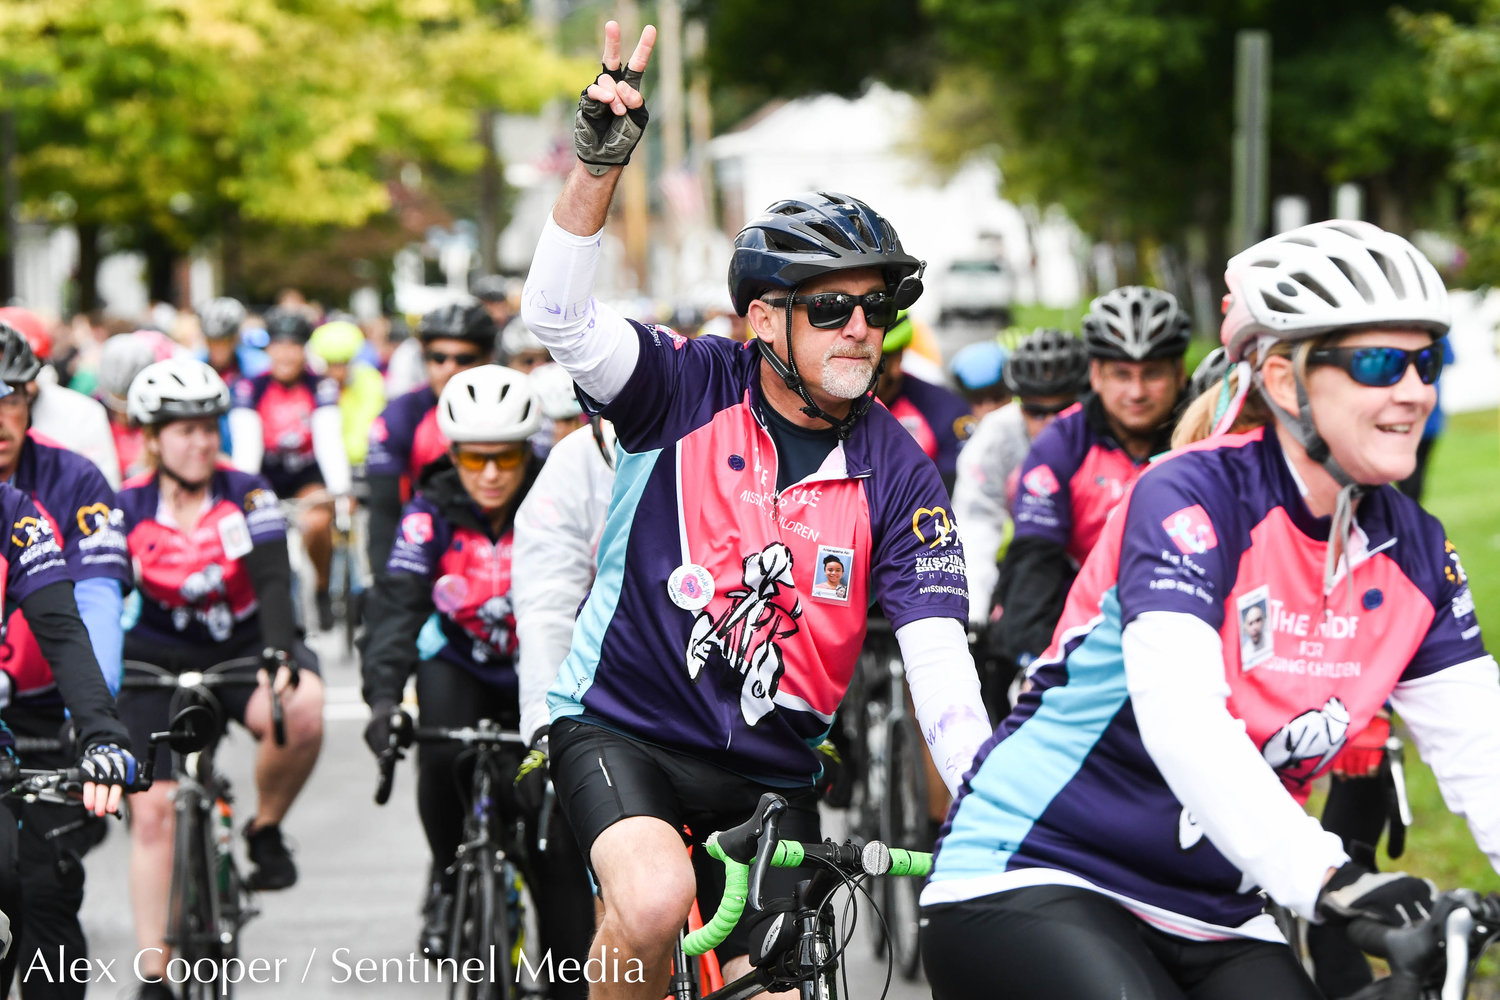 A rider flashes the peace sign after a short break during the 24th annual Ride For Missing Children on Wednesday, Sept. 28 outside of Gregory B. Jarvis Middle School in Mohawk.